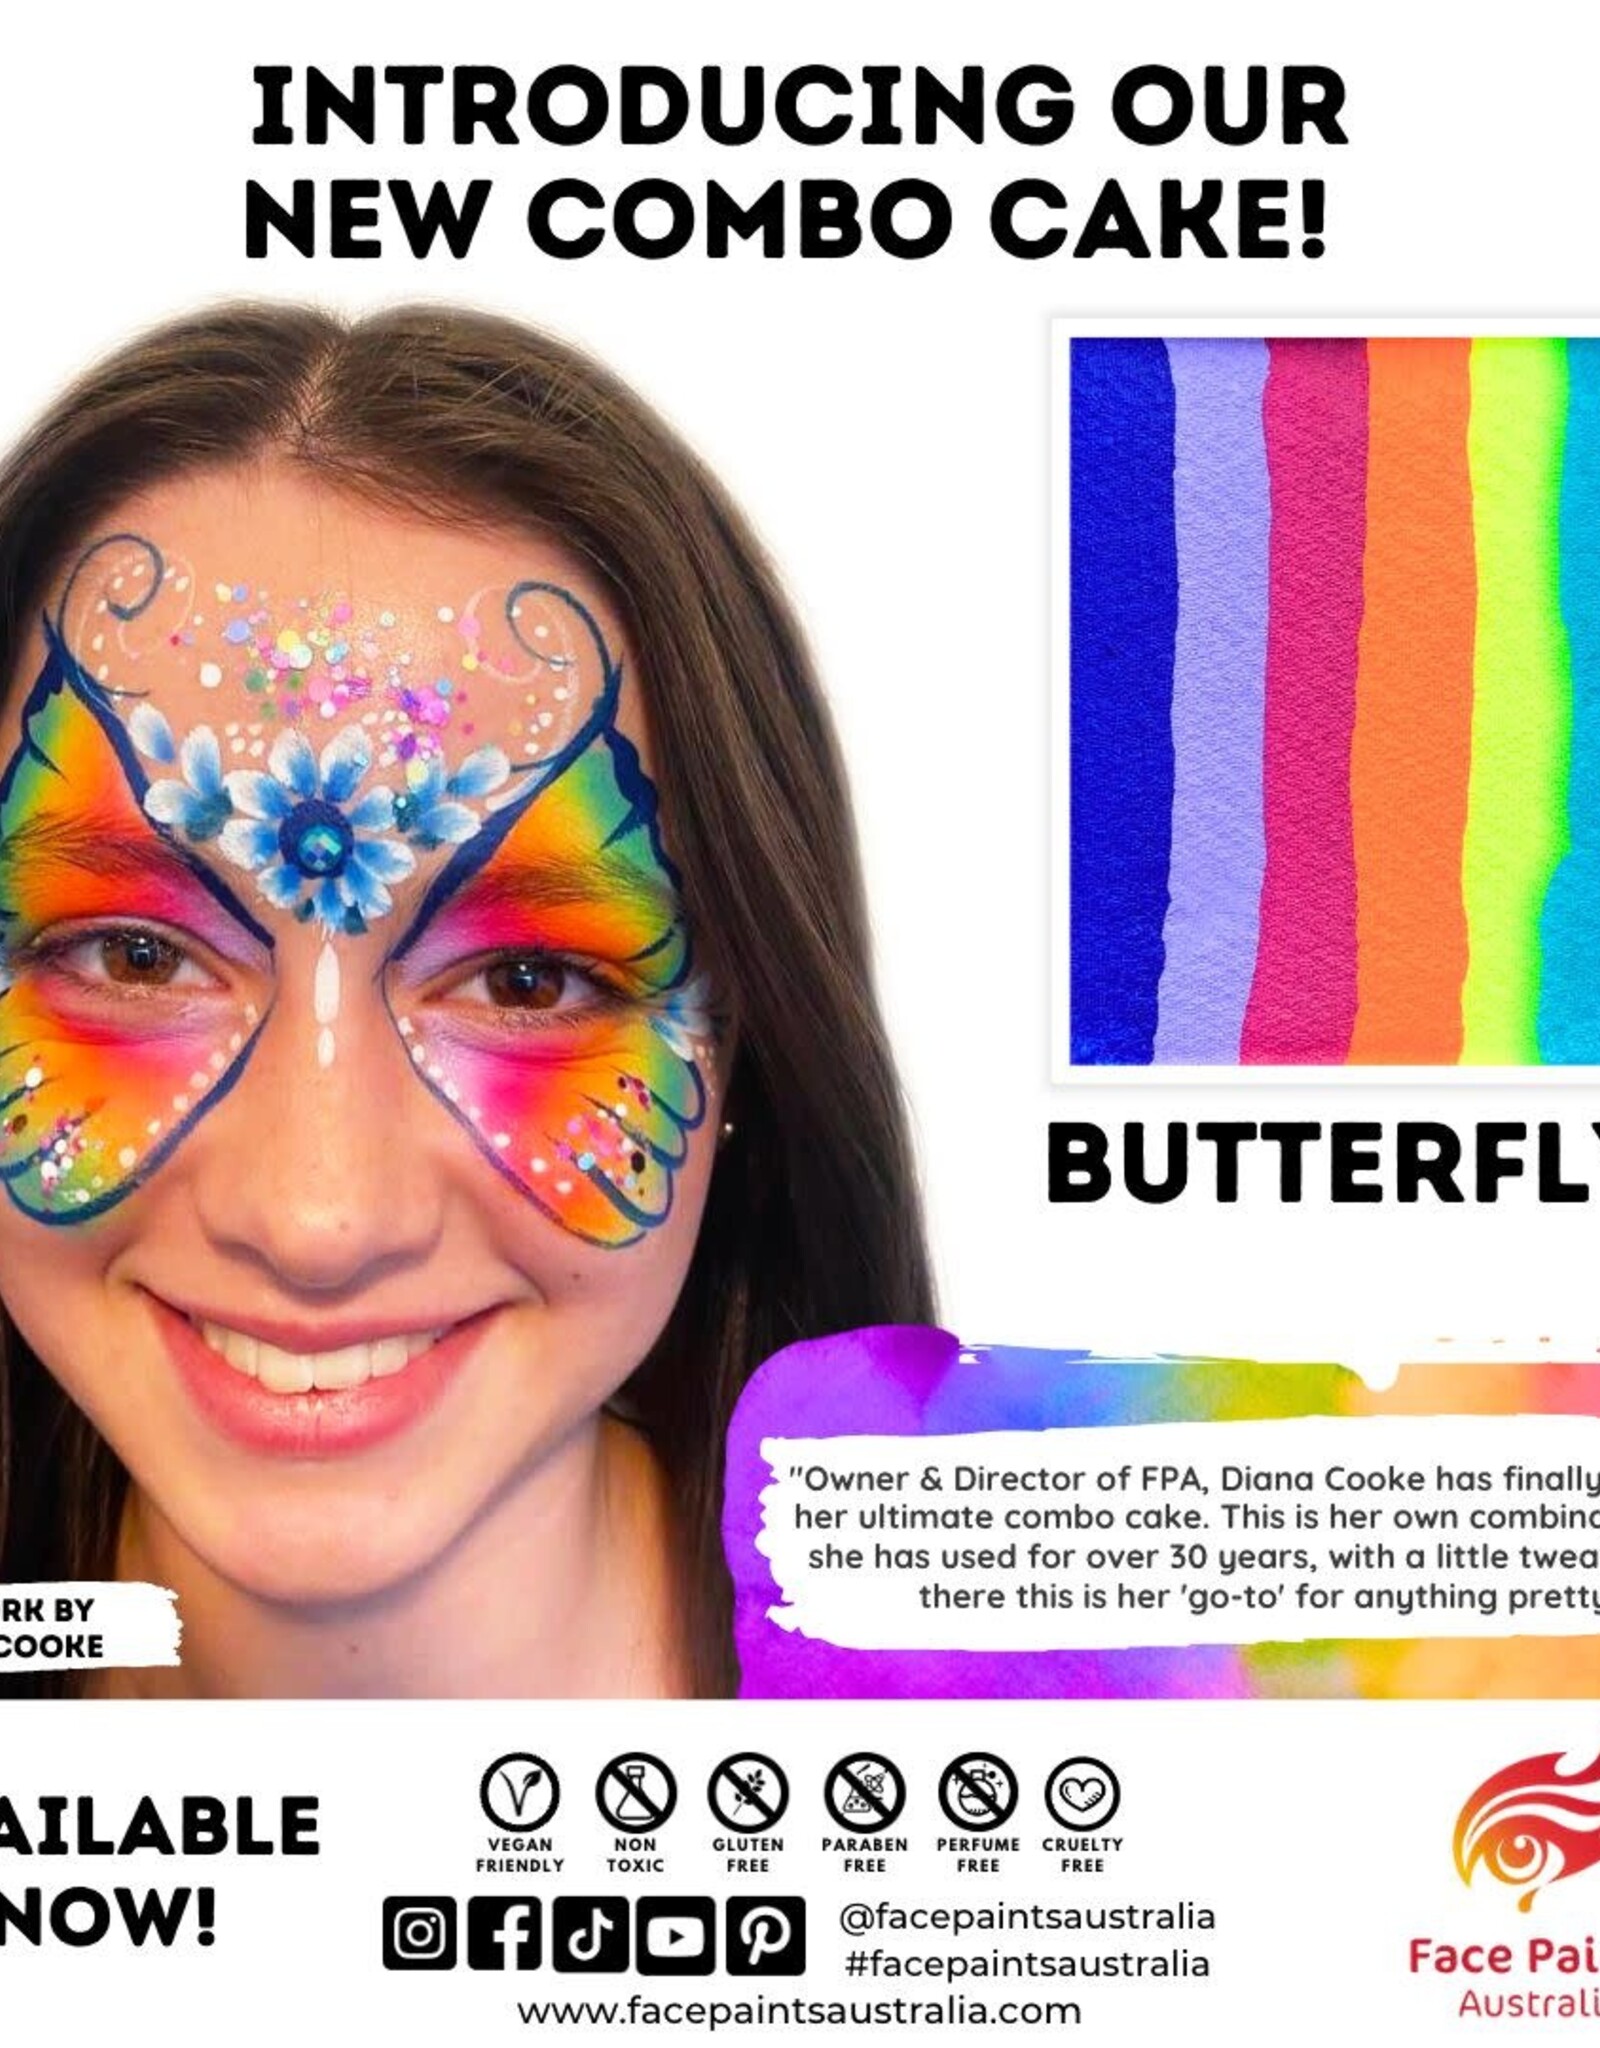 Face Paints Australia Butterfly combo Cake  FPA - 50g